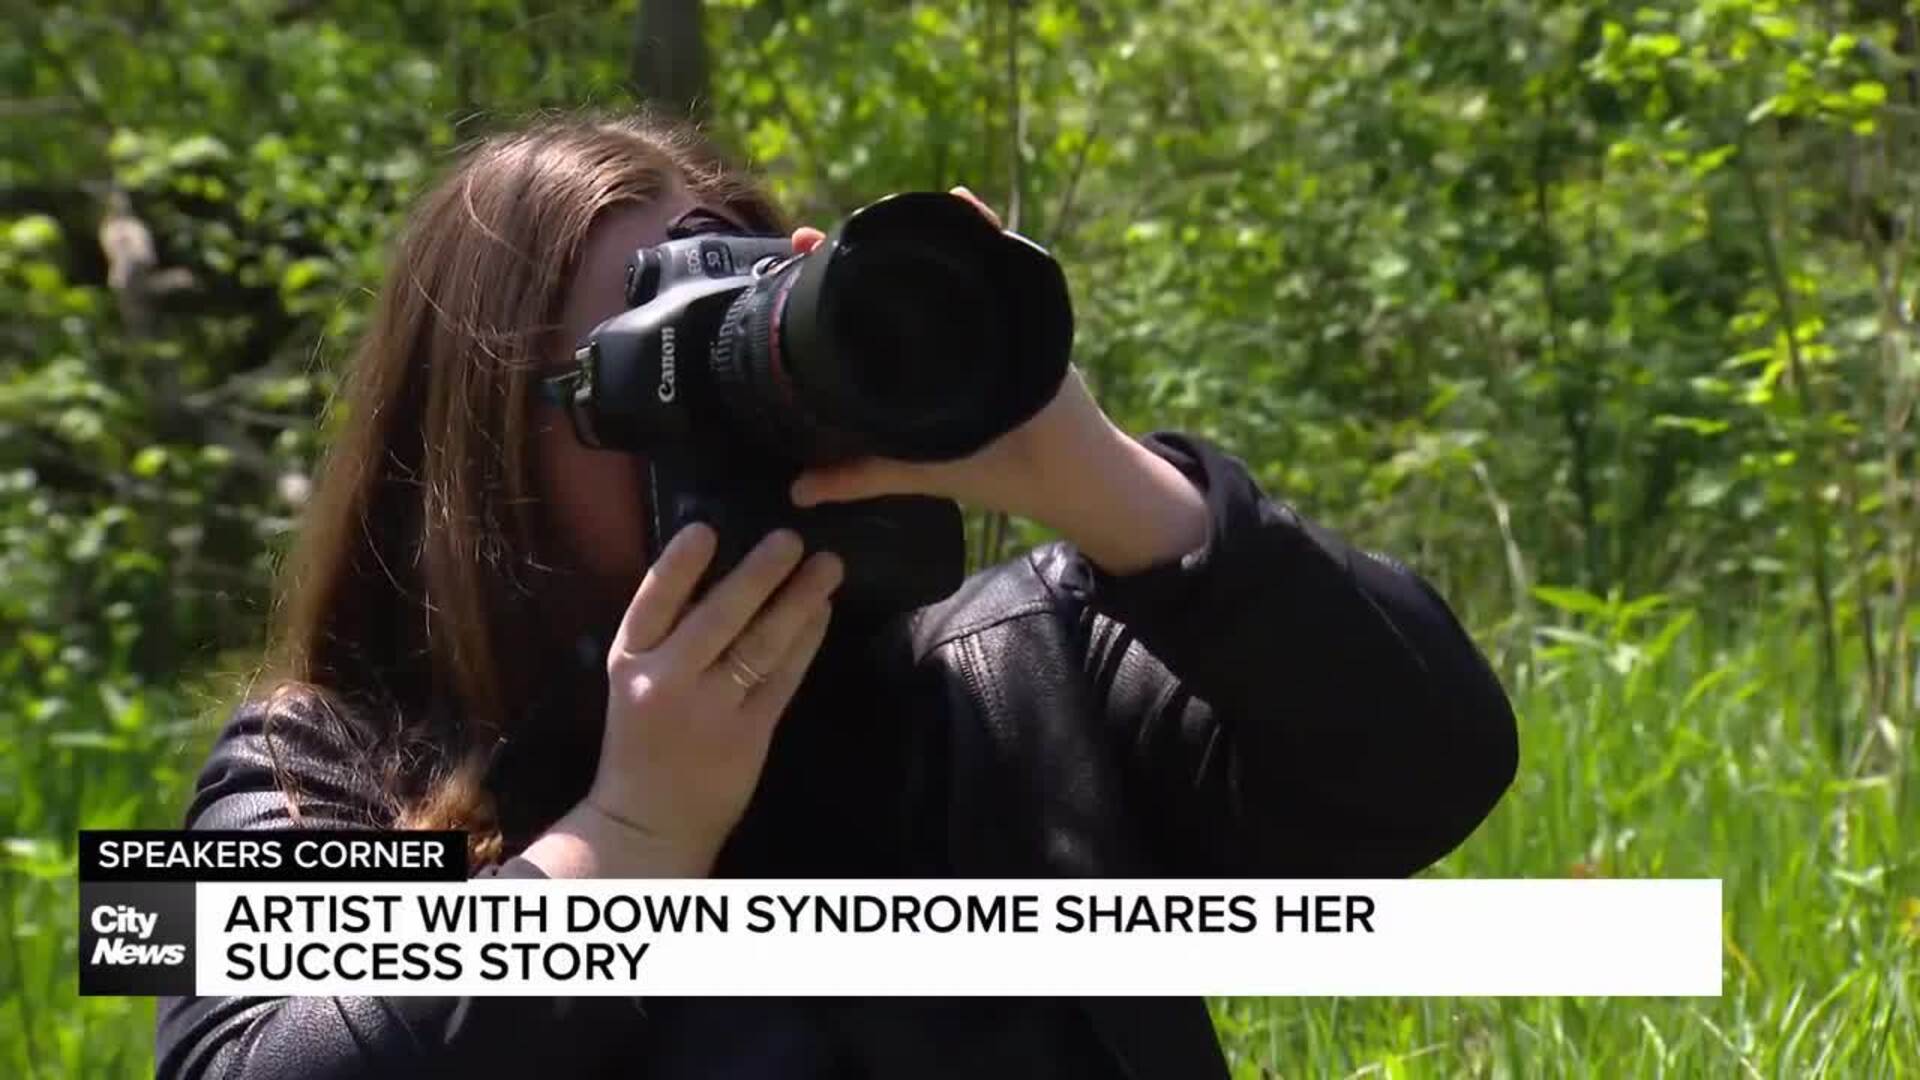 Mississauga woman living with Down syndrome shares her success story